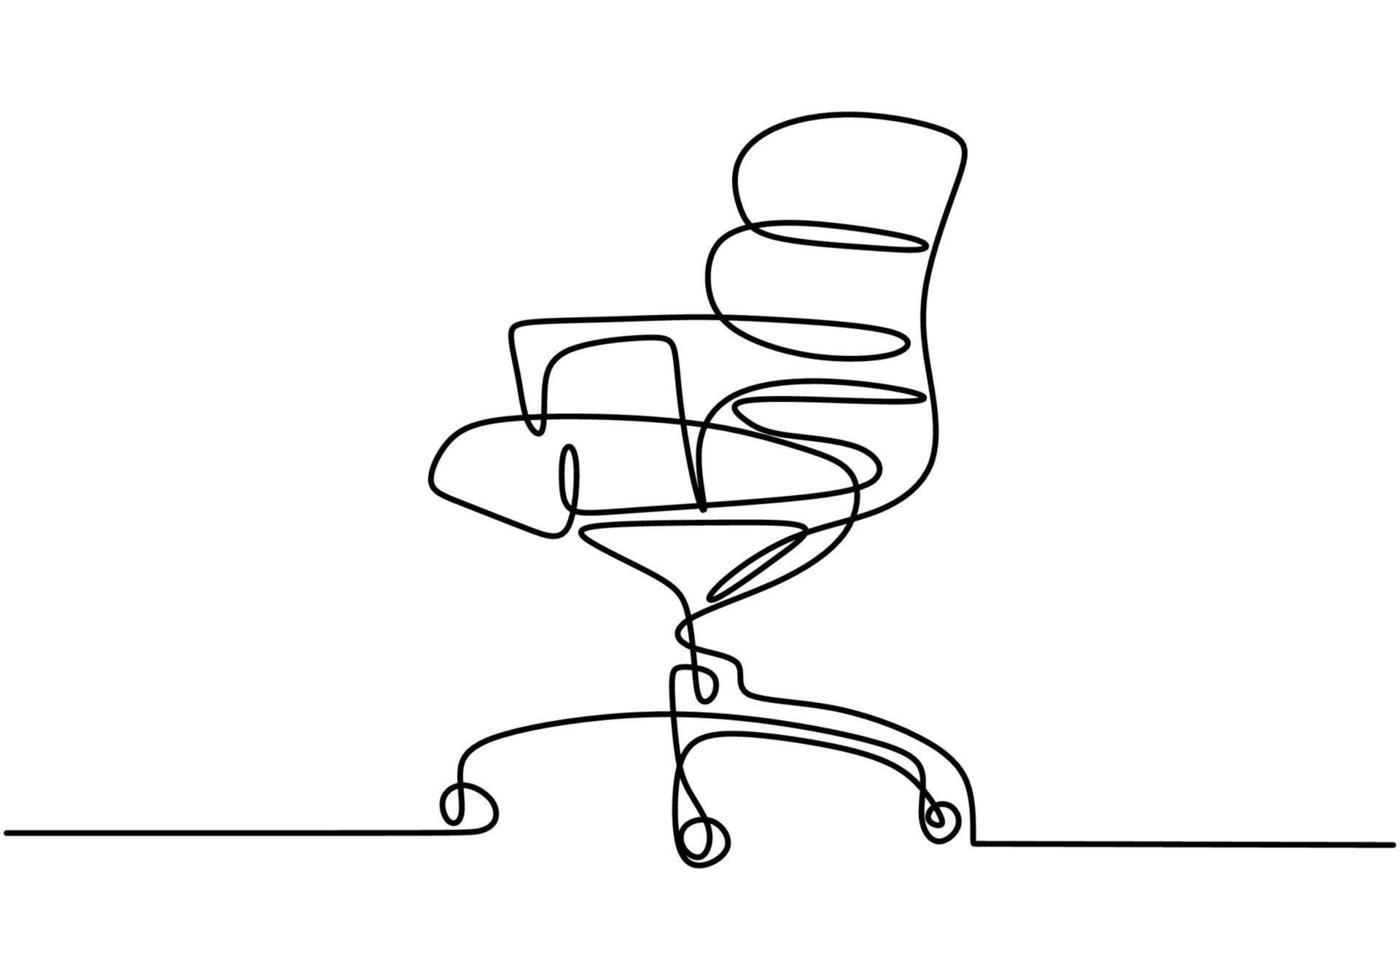 Continuous one line drawing office chair. Modern work chair isolated on white background. Comfortable office chair for work minimalism design. Stylish office interior concept. Vector illustration